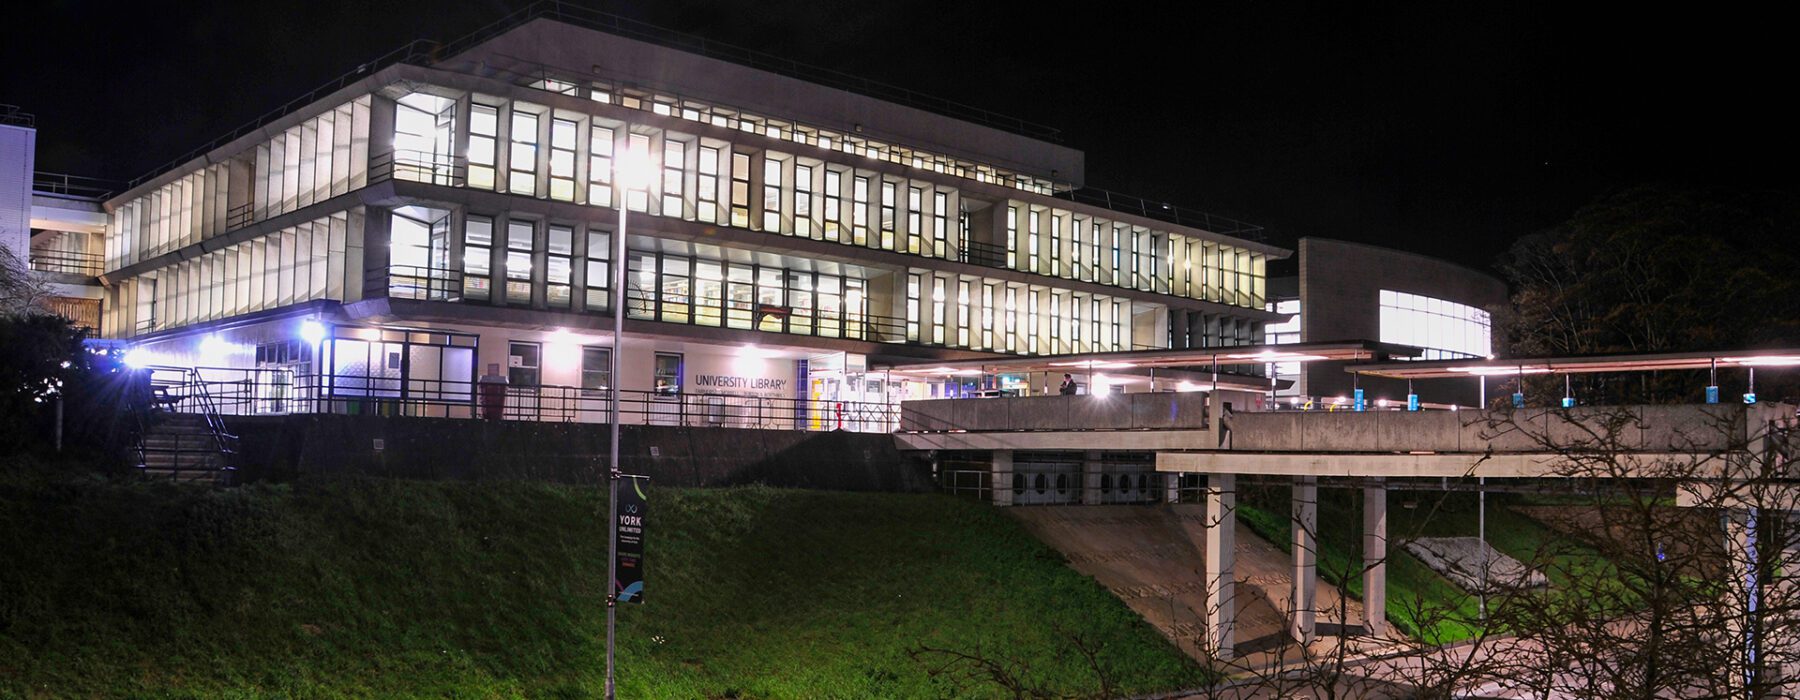 The University of York library lit up at night